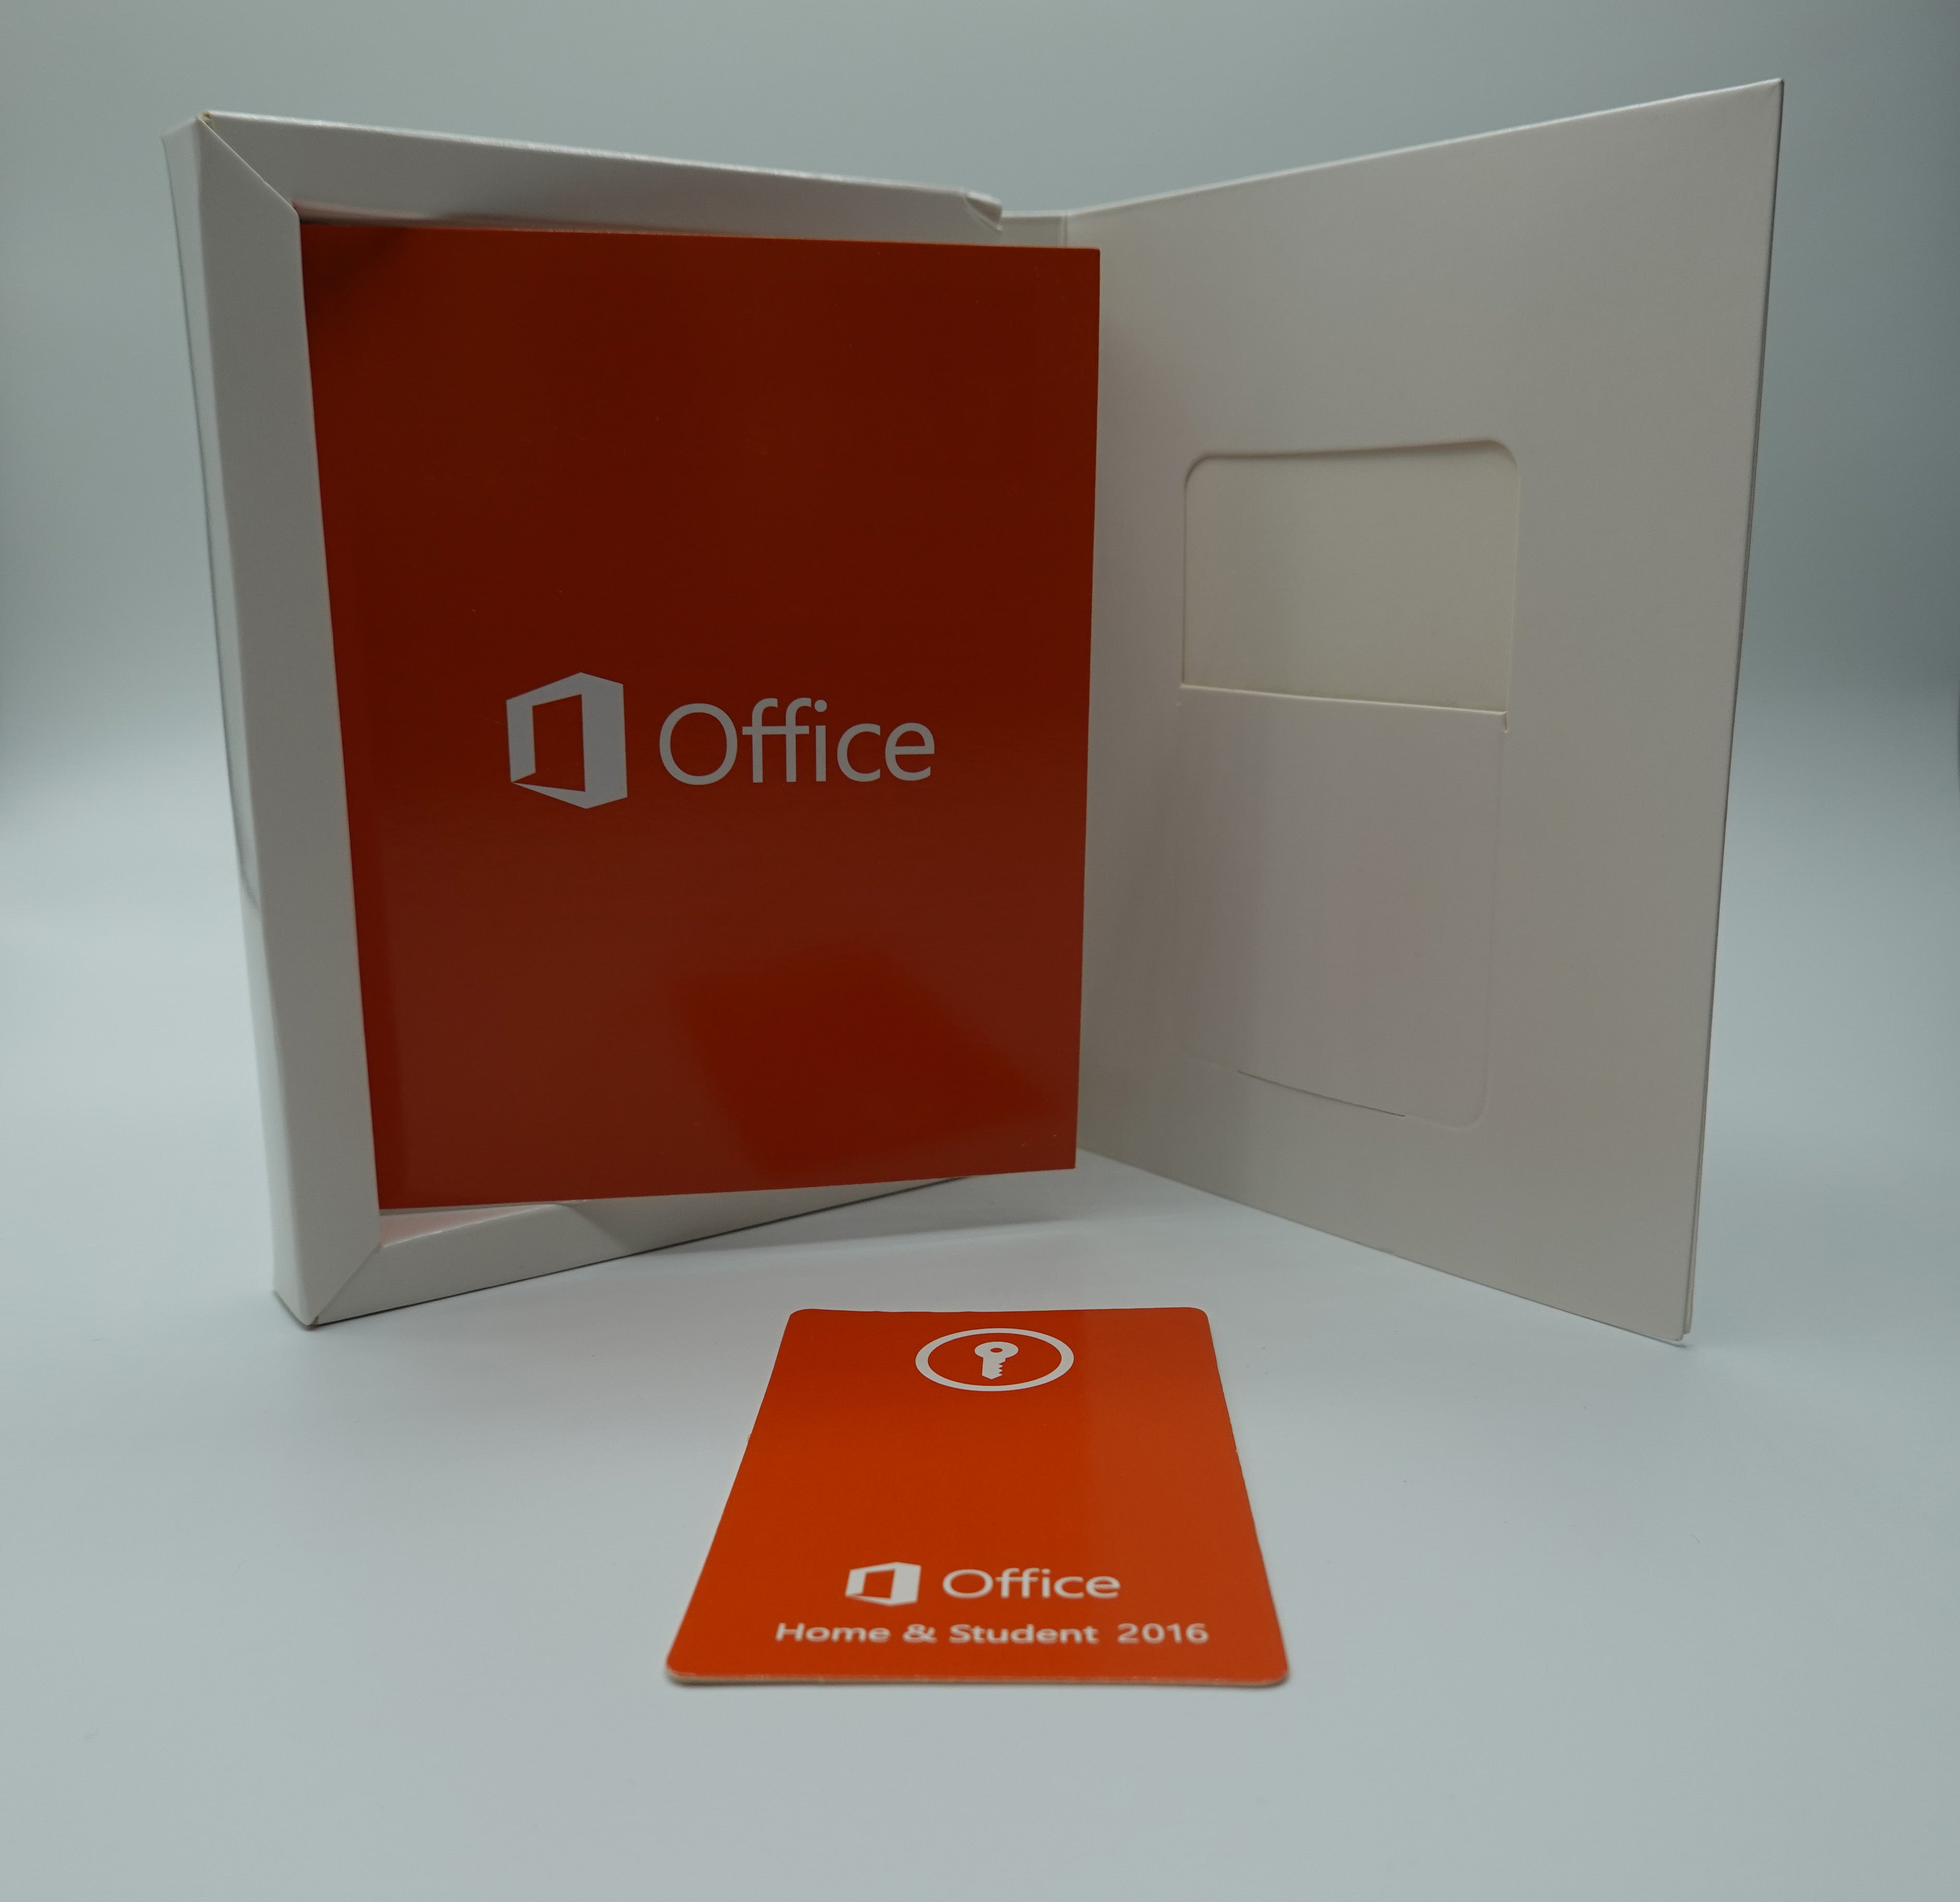 Microsoft Office Home & Student 2016 for Windows - Retail Box and Product Key Card